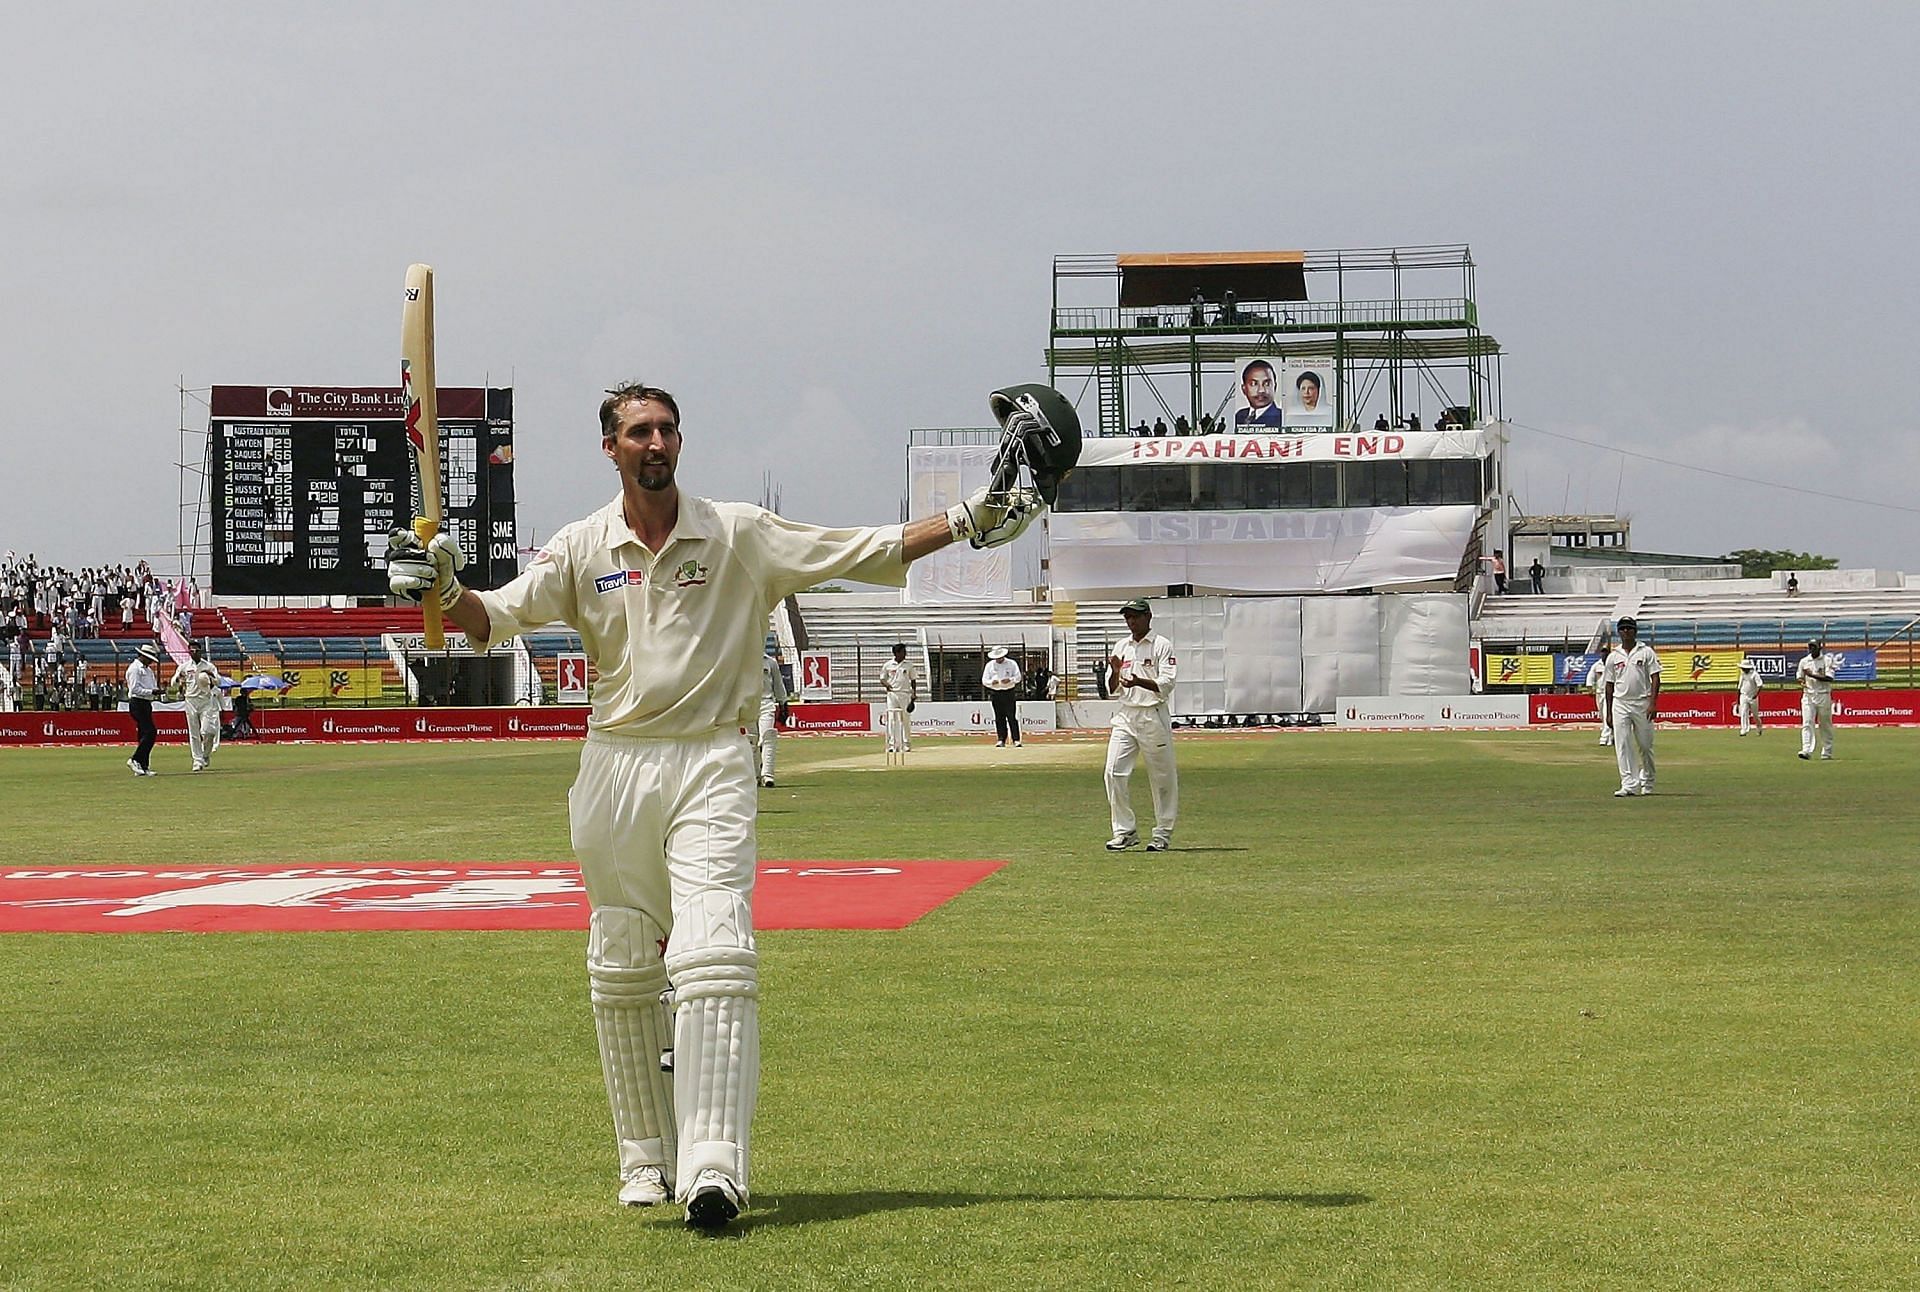 Jason Gillespie scored a double century in what turned out to be his last Test, against Bangladesh